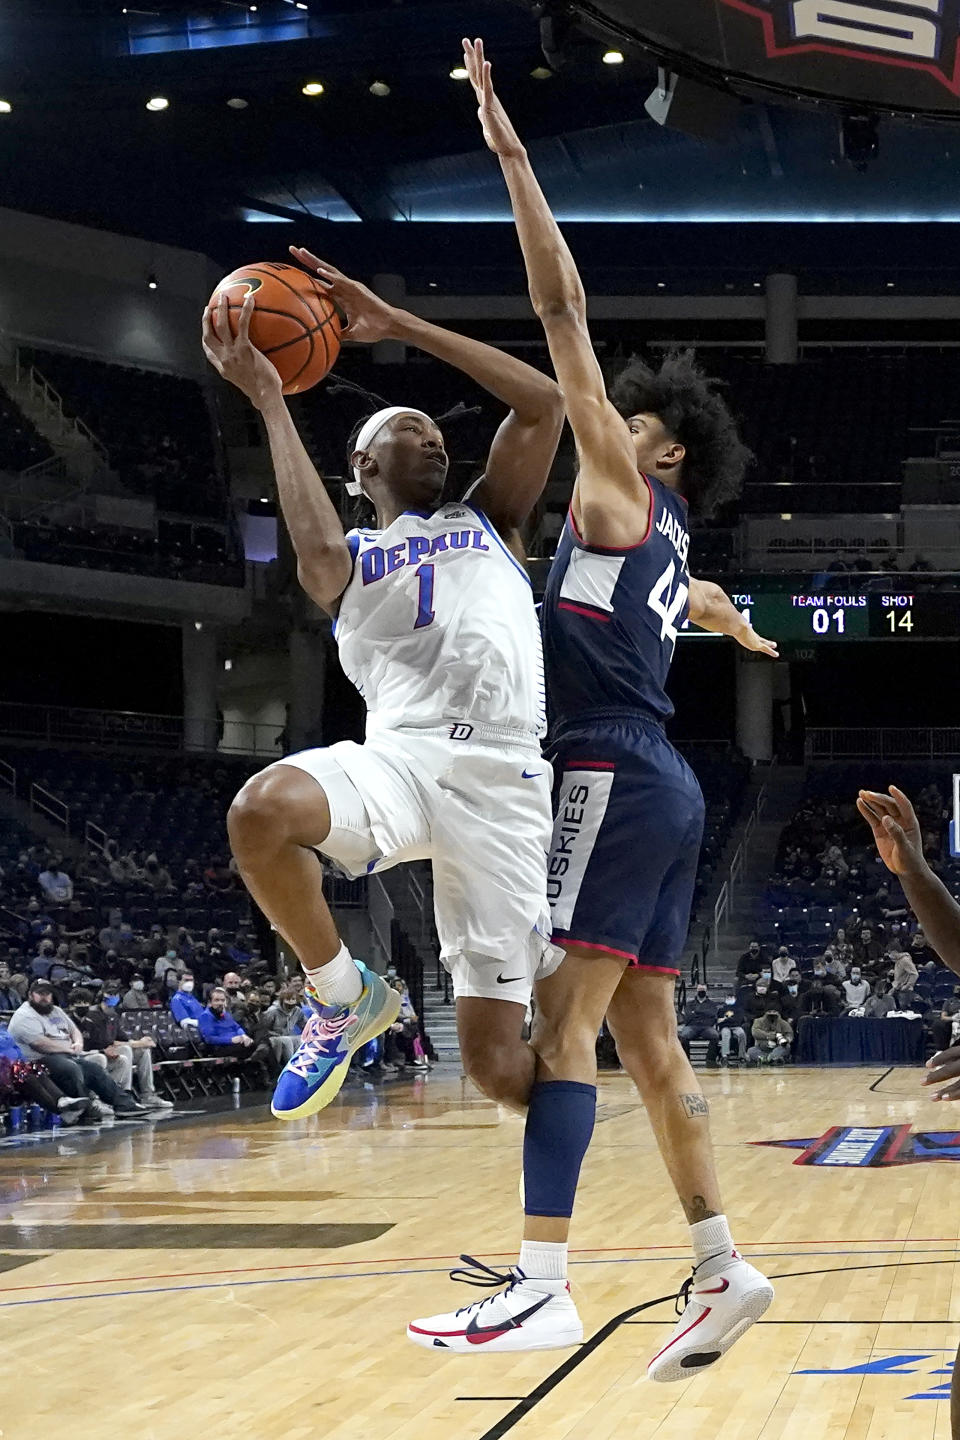 DePaul's Javan Johnson (1) shoots under pressure from Connecticut's Andre Jackson during the first half of an NCAA college basketball game Saturday, Jan. 29, 2022, in Chicago. (AP Photo/Charles Rex Arbogast)